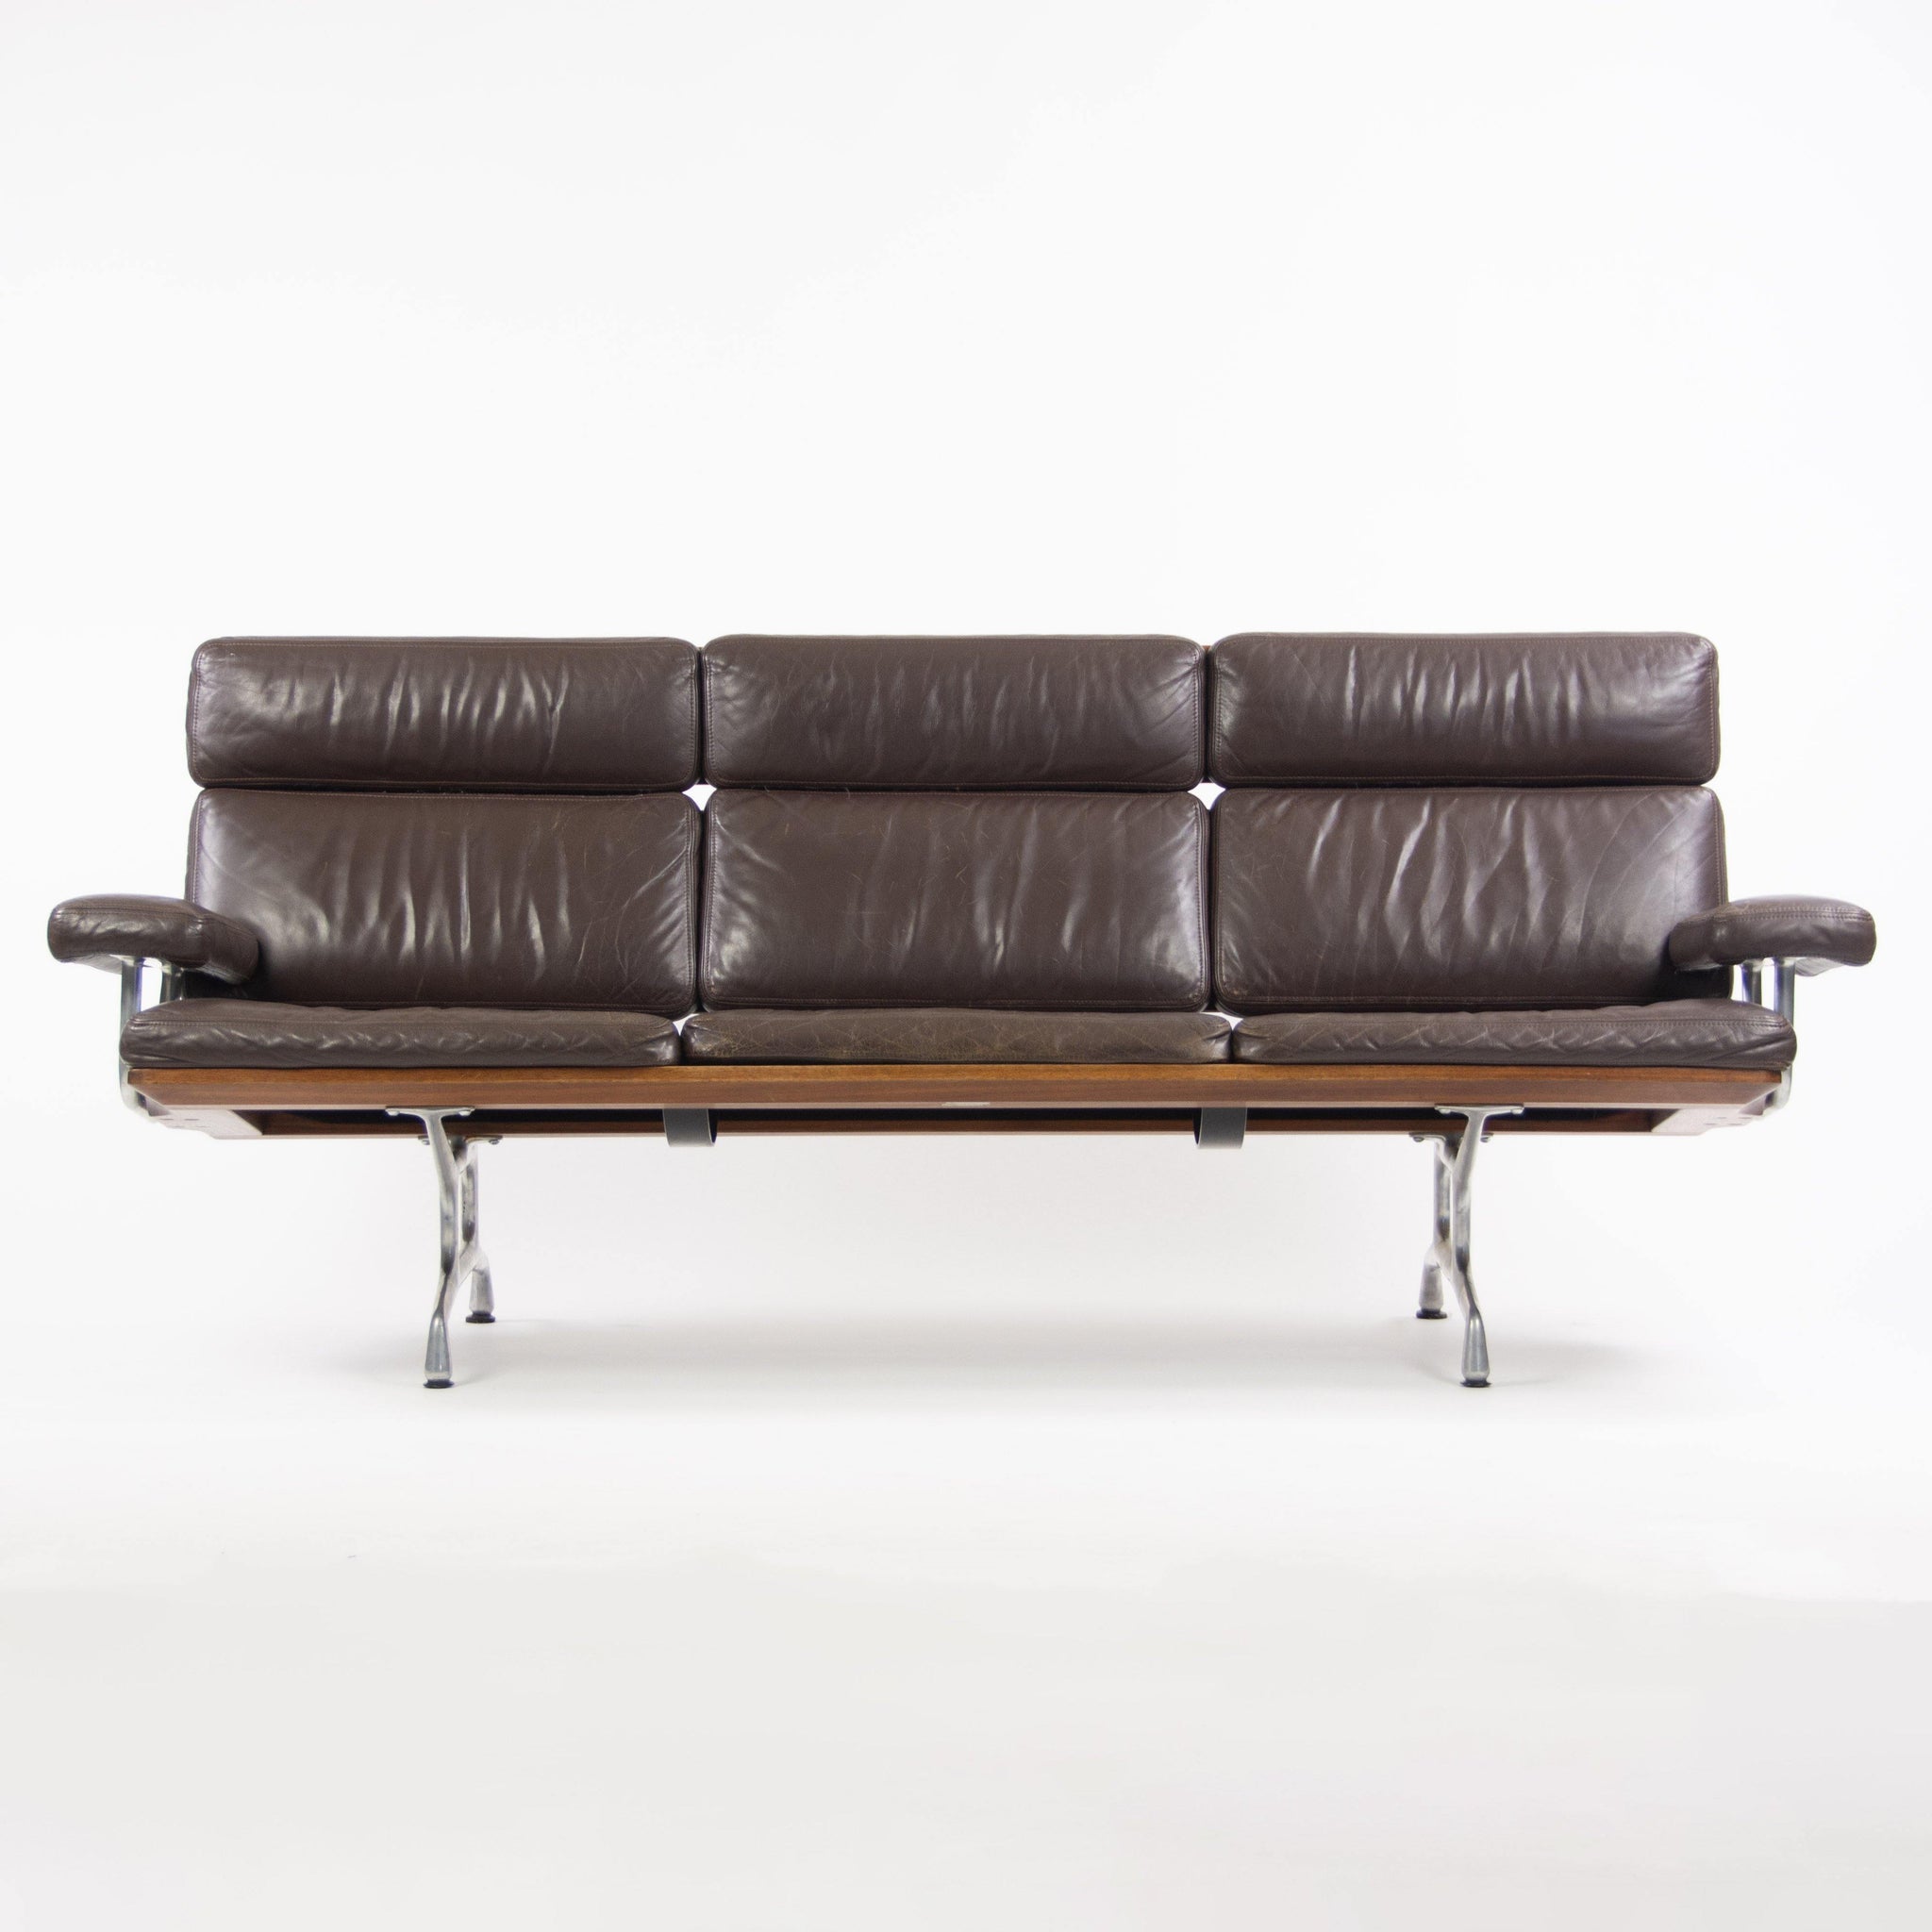 1980s Vintage Eames Herman Miller Three Seater Sofa Walnut and Brown Leather #1 - Rarify Inc.